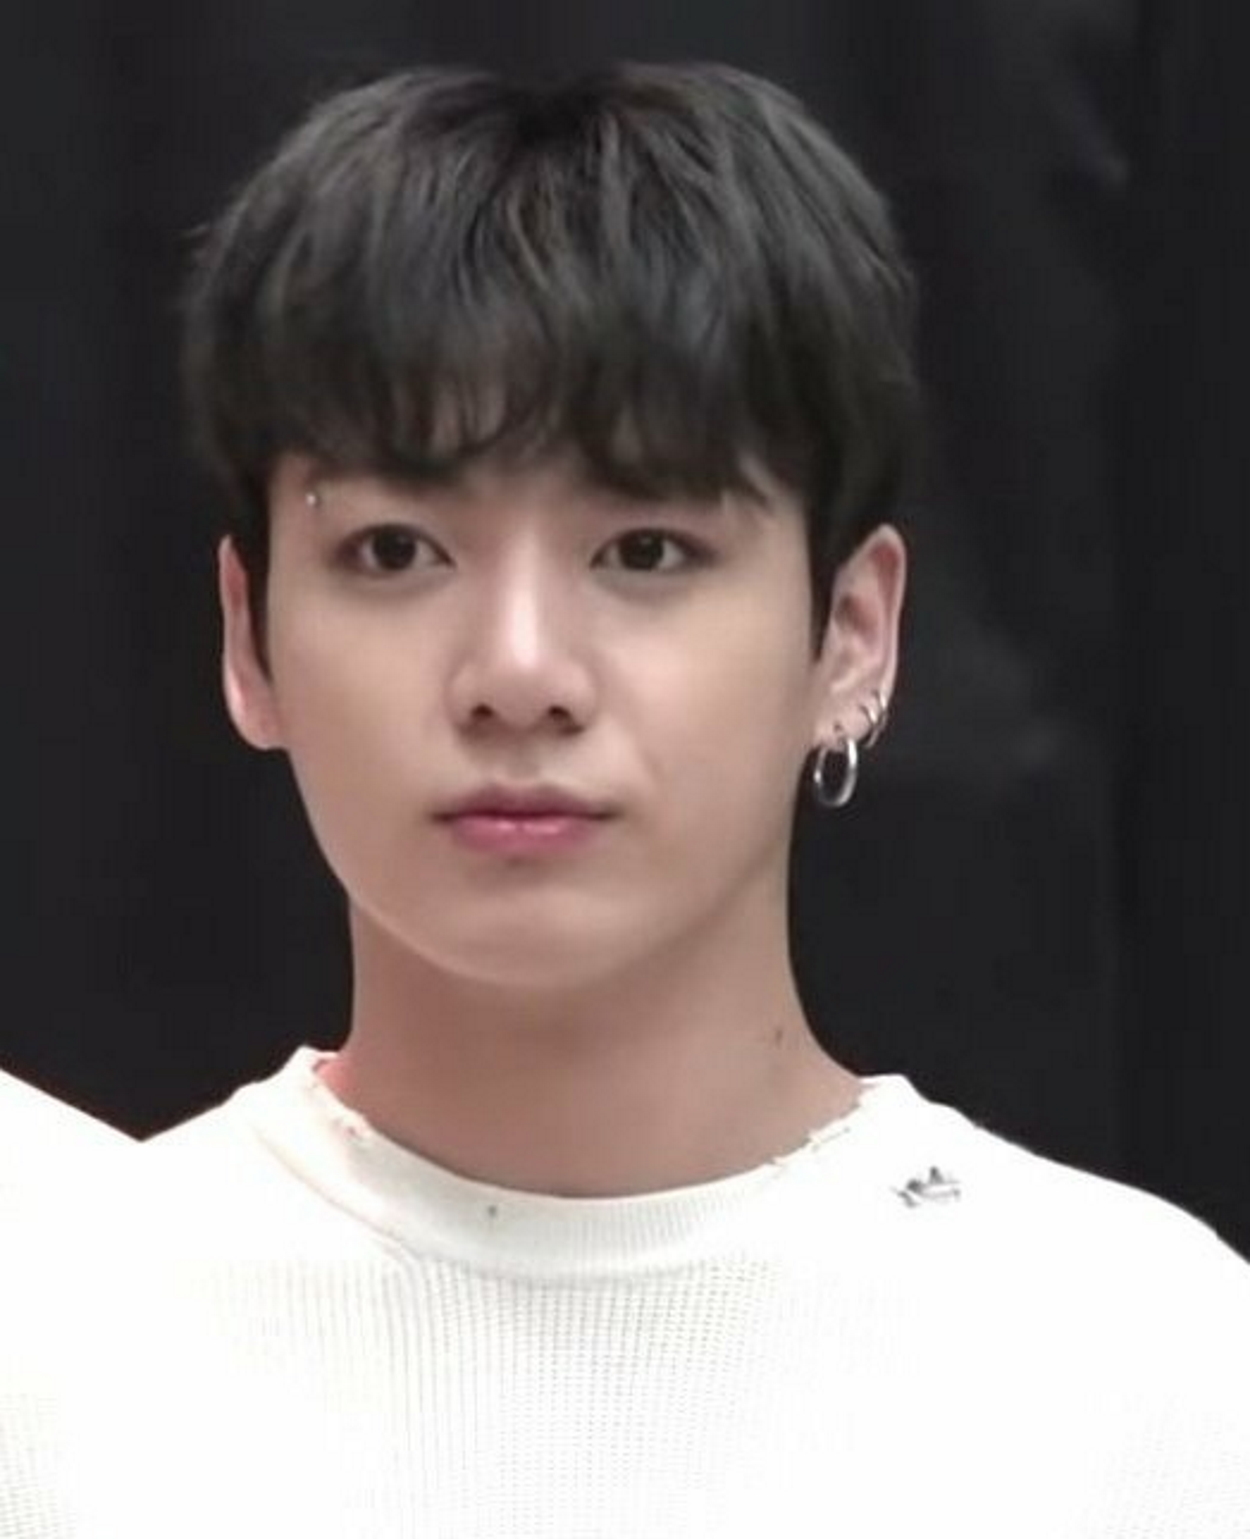 Jungkook Goes Back To His Childhood With Short Black Hair 